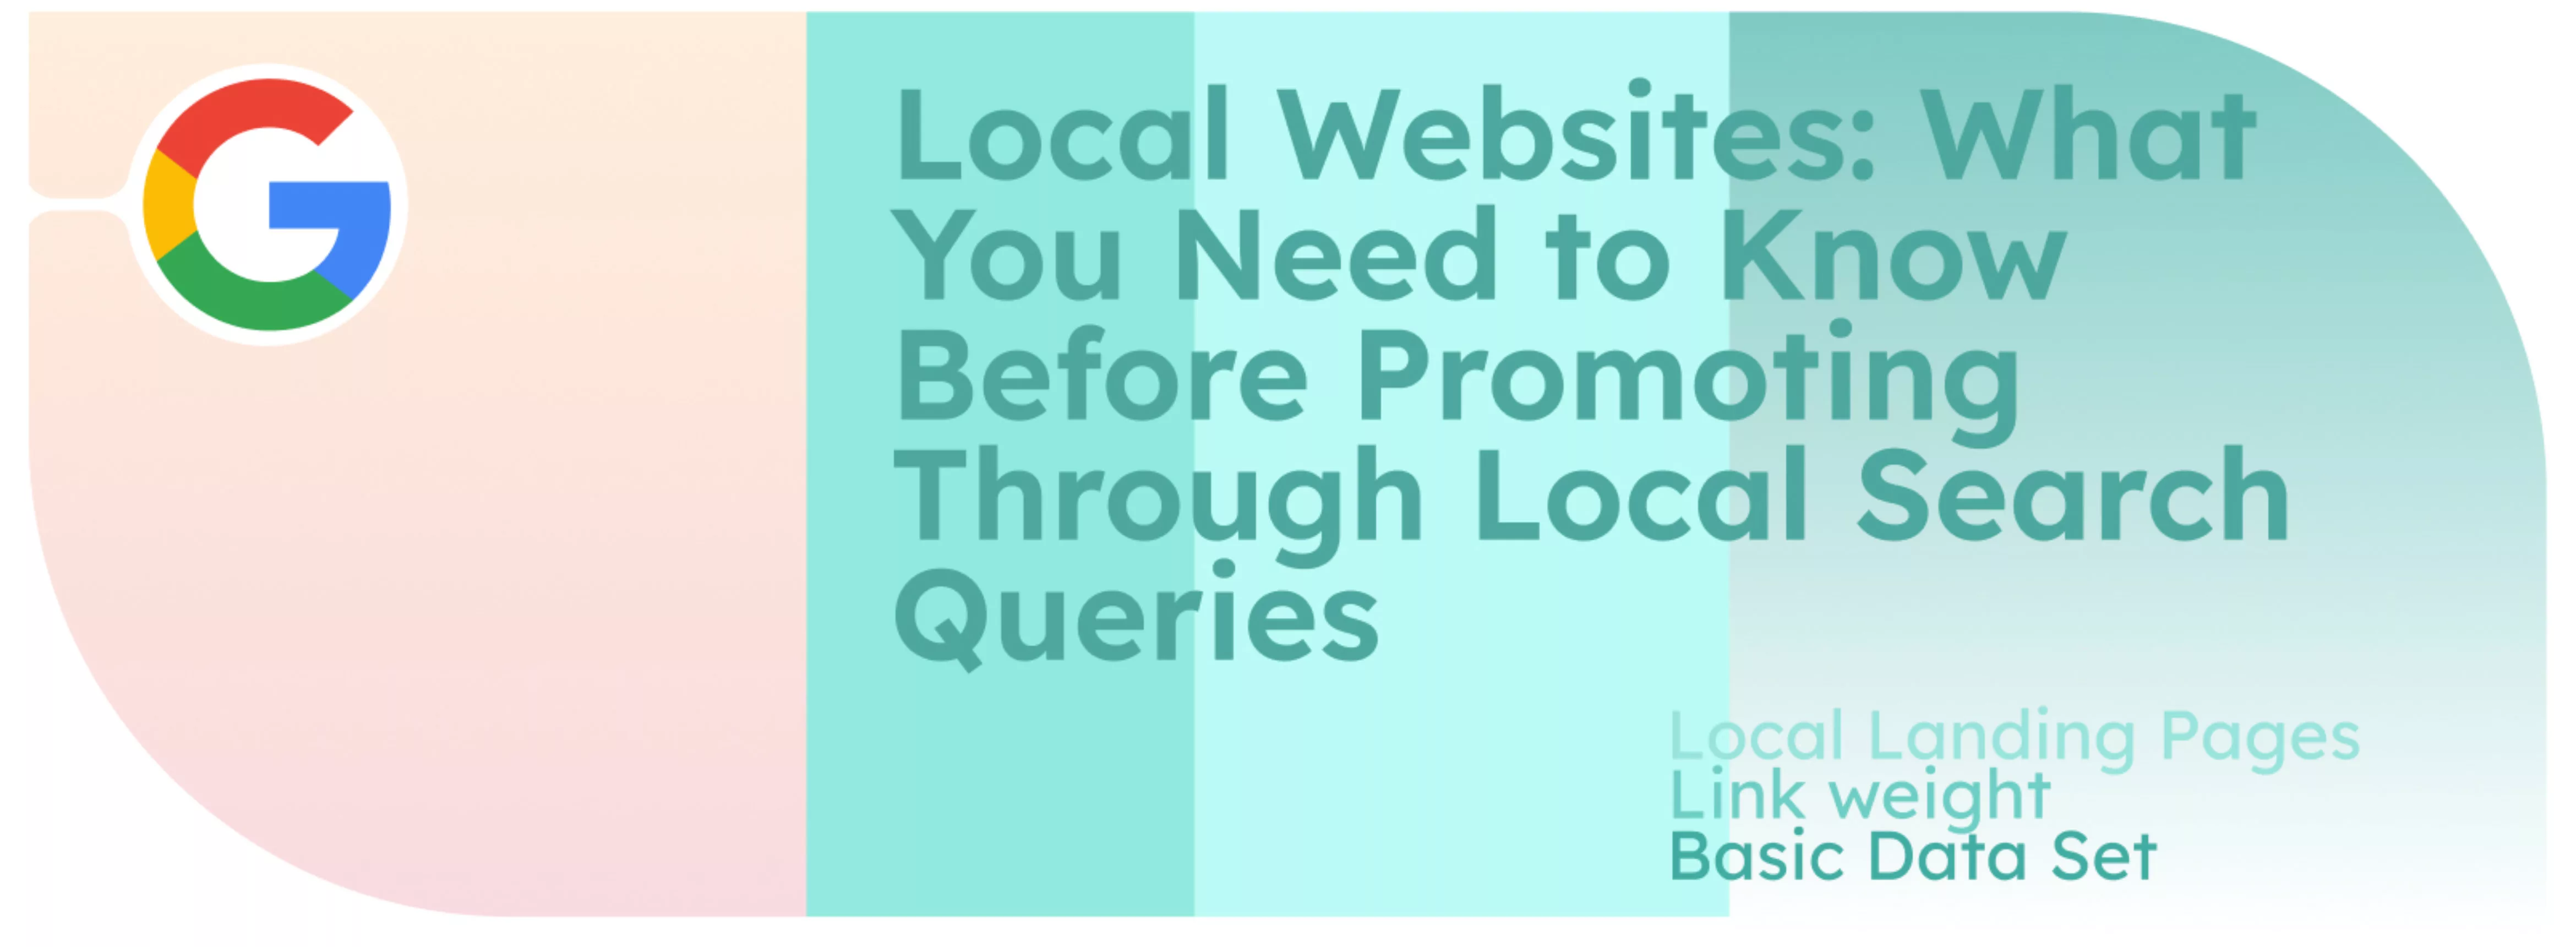 Local Websites: What You Need to Know Before Promoting Through Local Search Queries